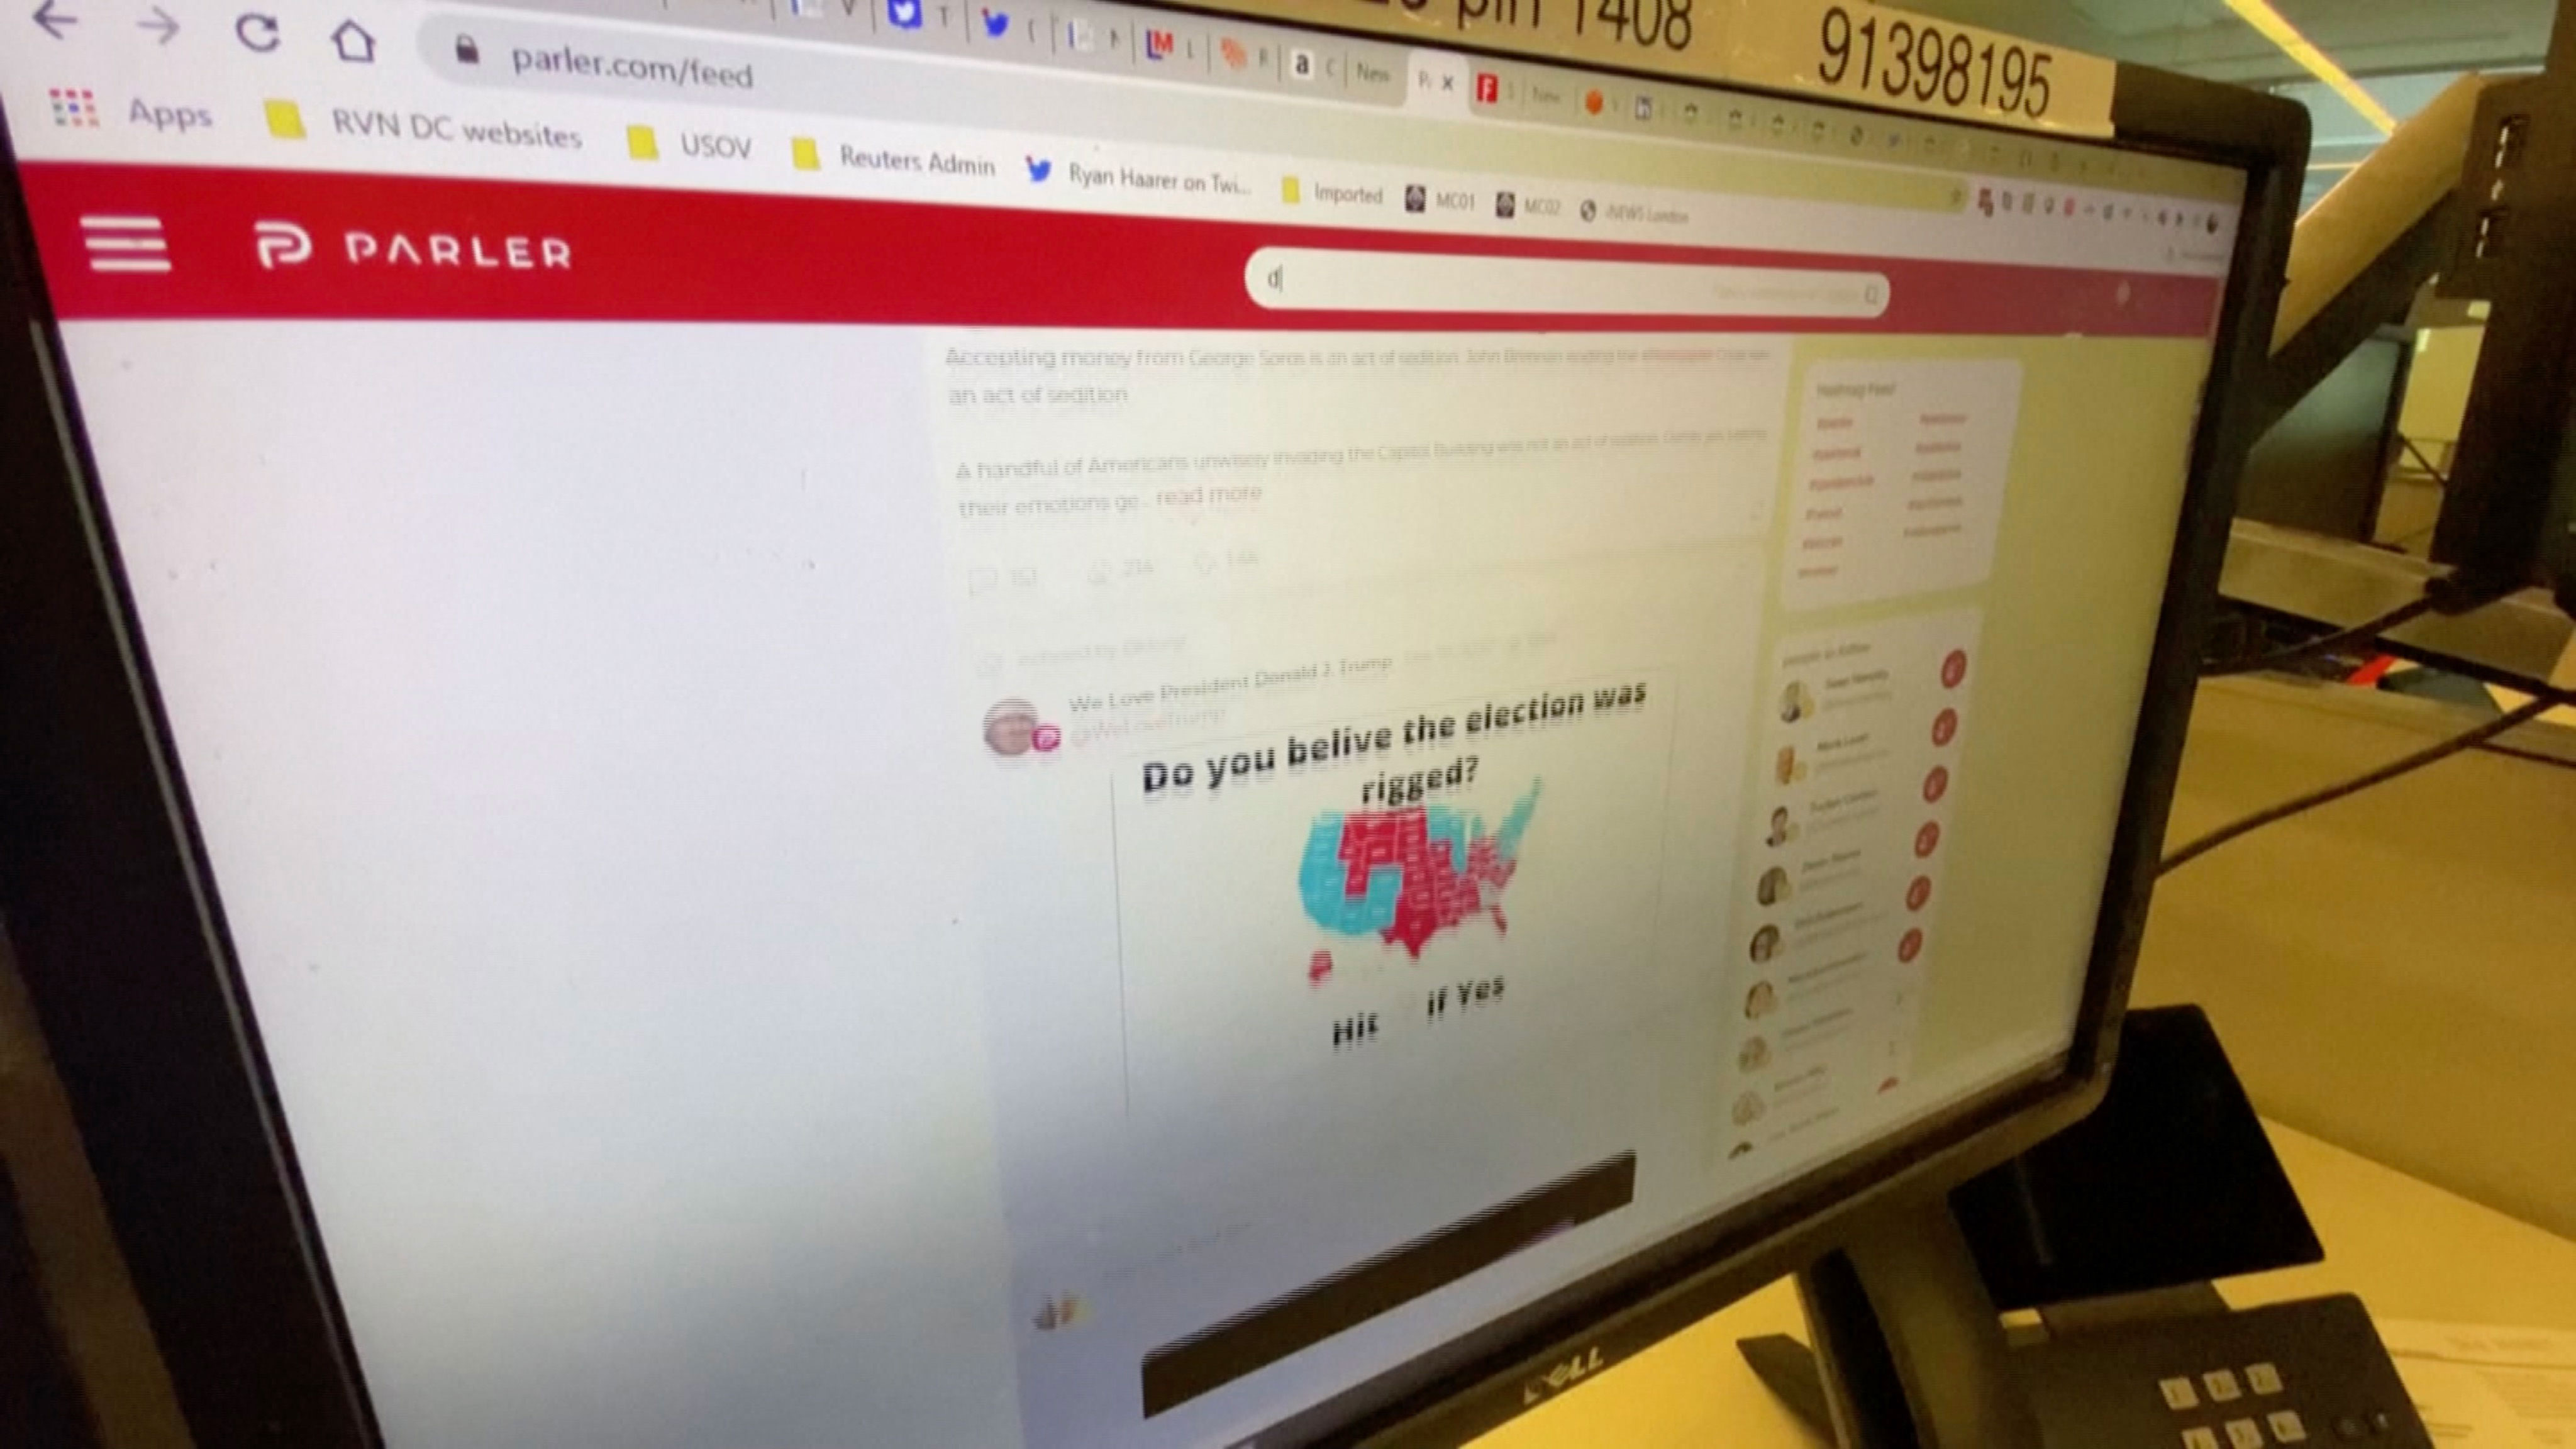 The Parler website is seen before its shutdown in this still from video, January 10, 2021. REUTERS/Reuters TV